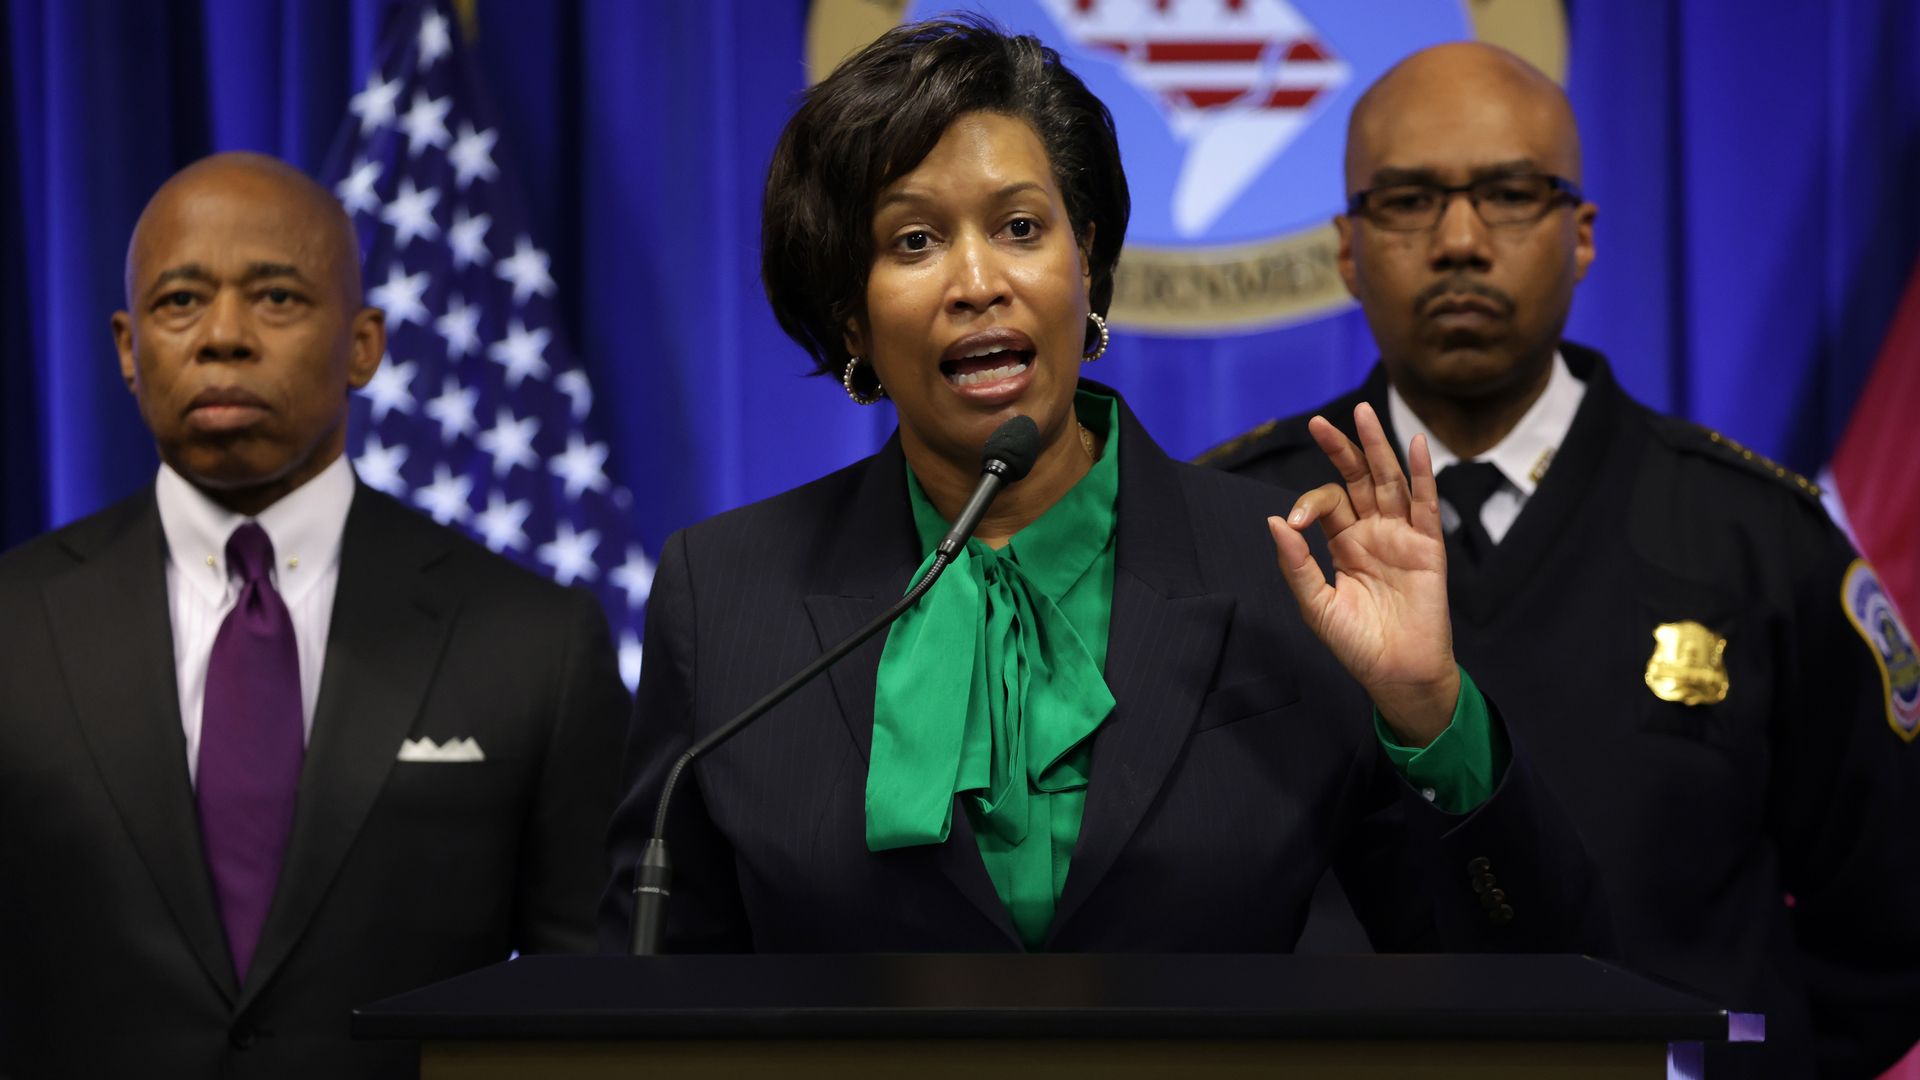 D.C. Mayor Muriel Bowser, center, is speaking at a podium with New York City Mayor Eric Adams on the left and D.C. police chief Robert Contee on the other side.